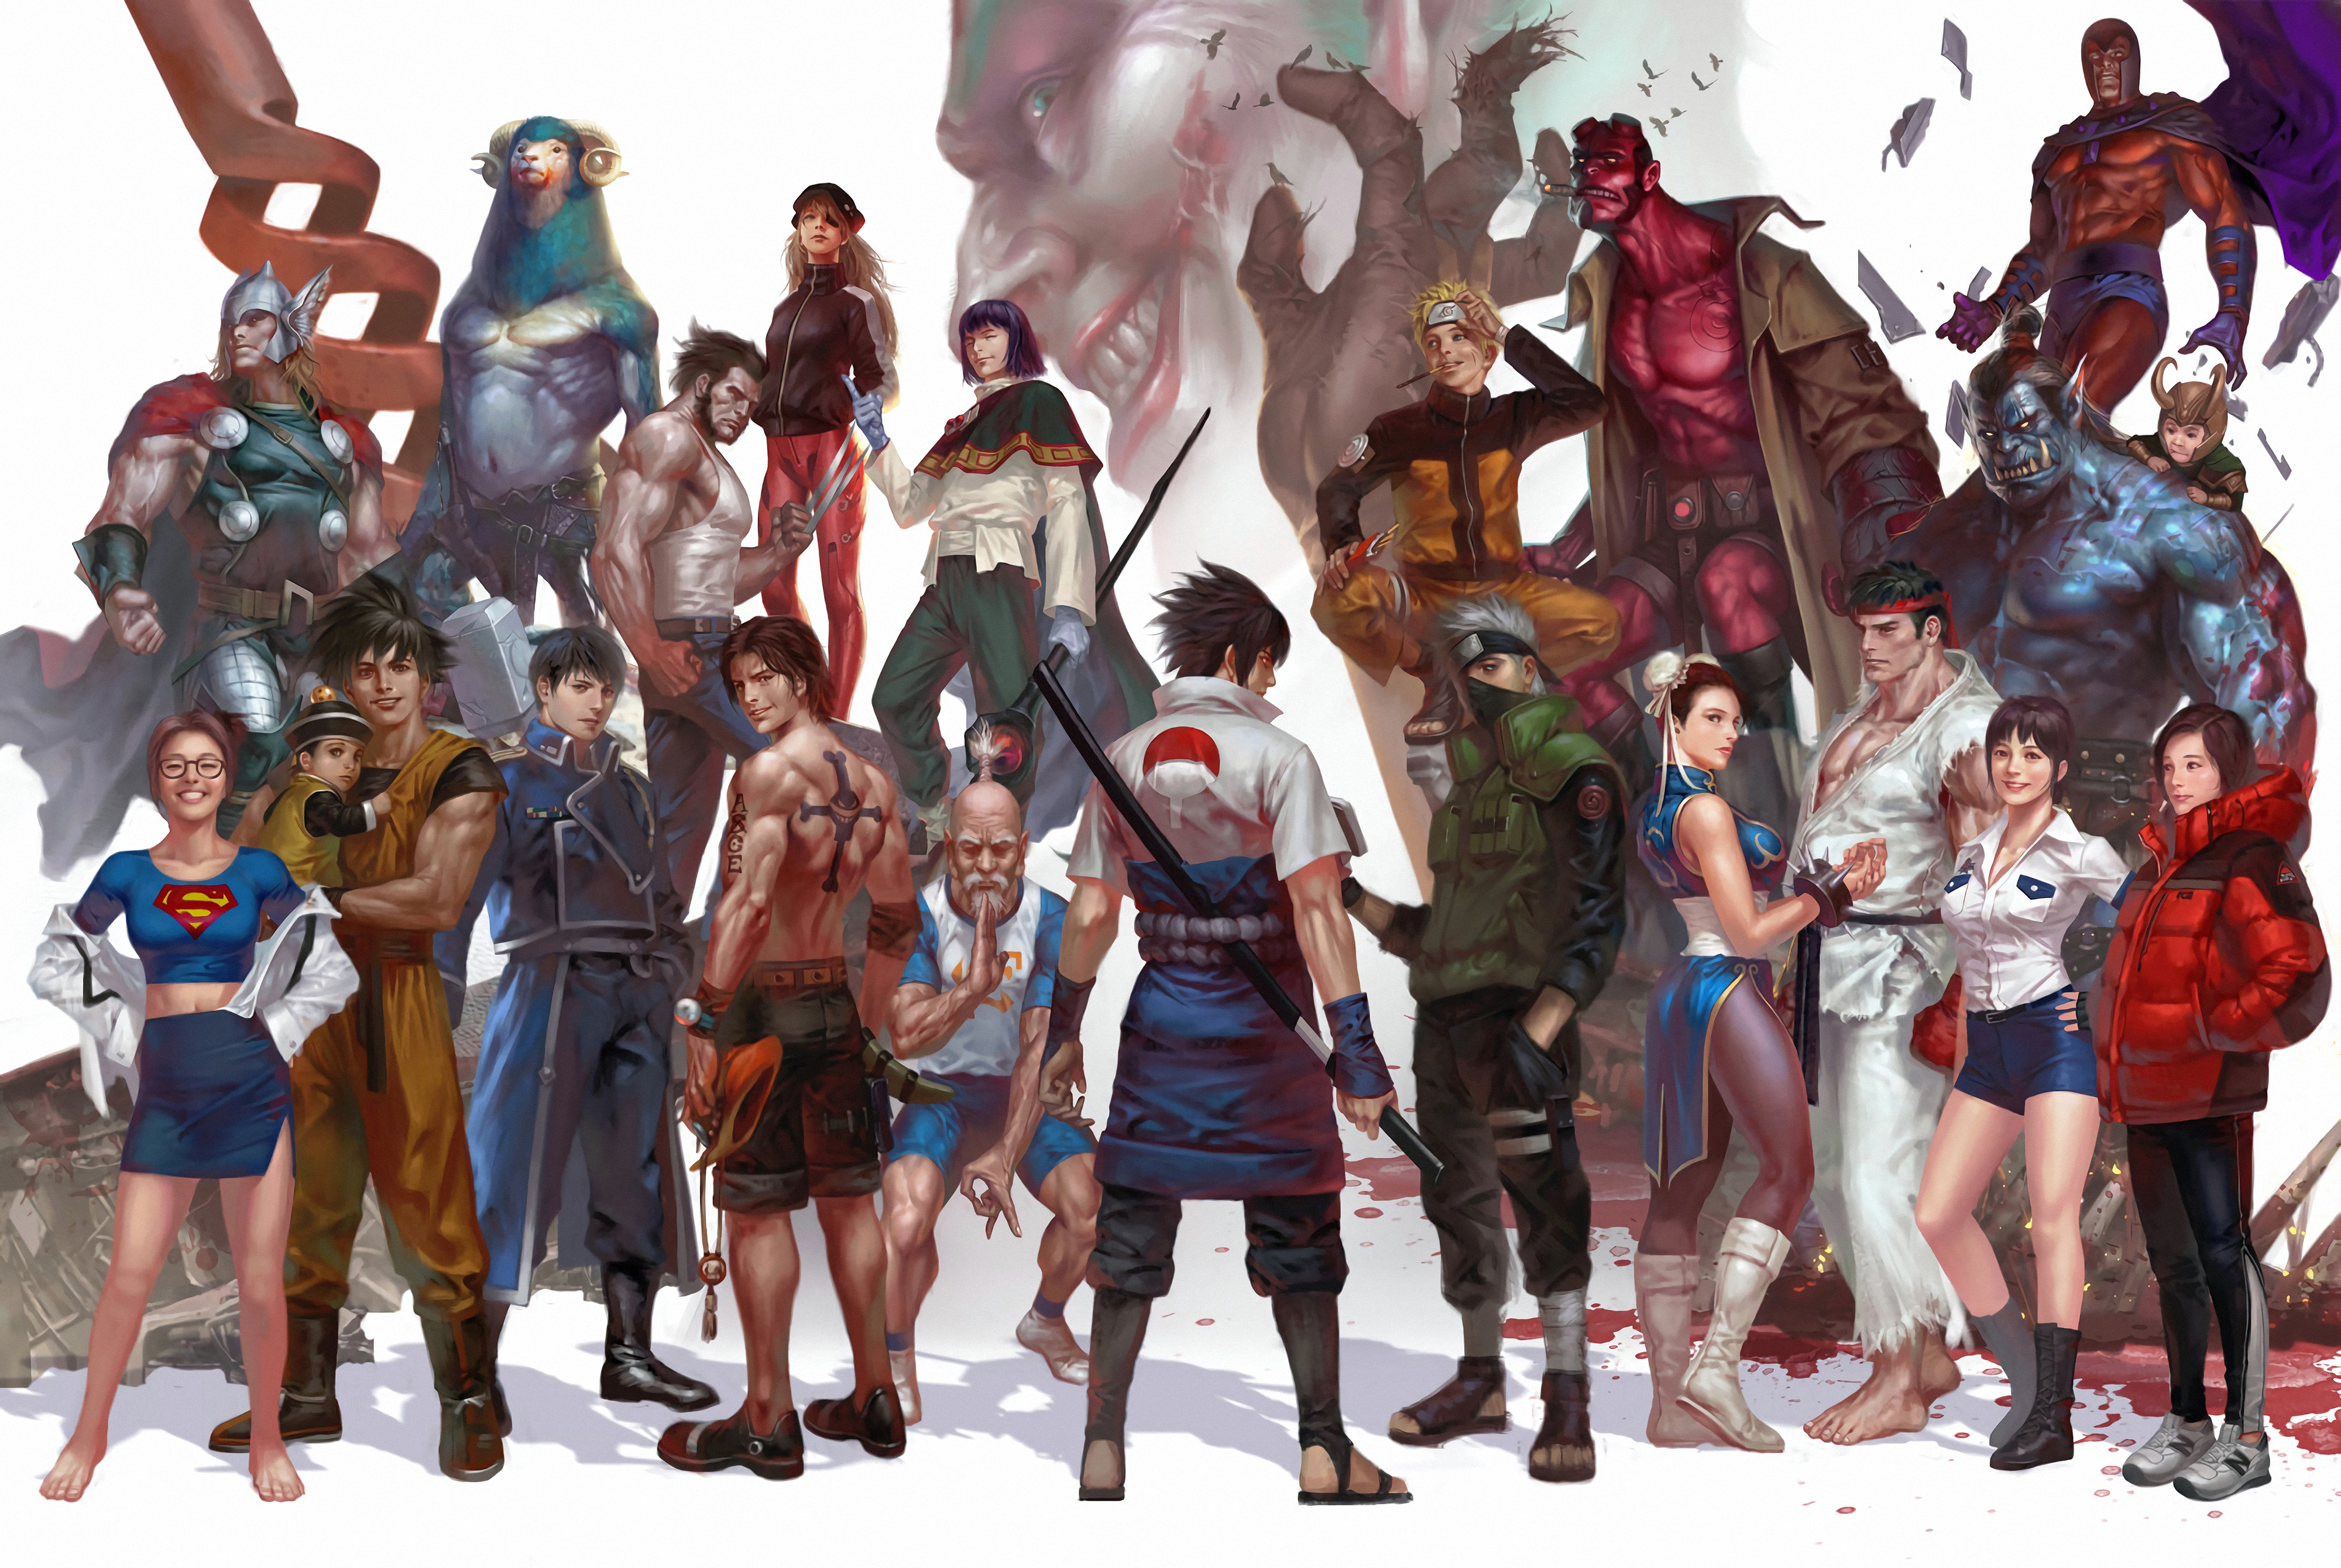 The Avengers Dragon Ball Naruto Anime One Piece Overwatch Street Fighter Full Metal Alchemist One Pu 4000x2680